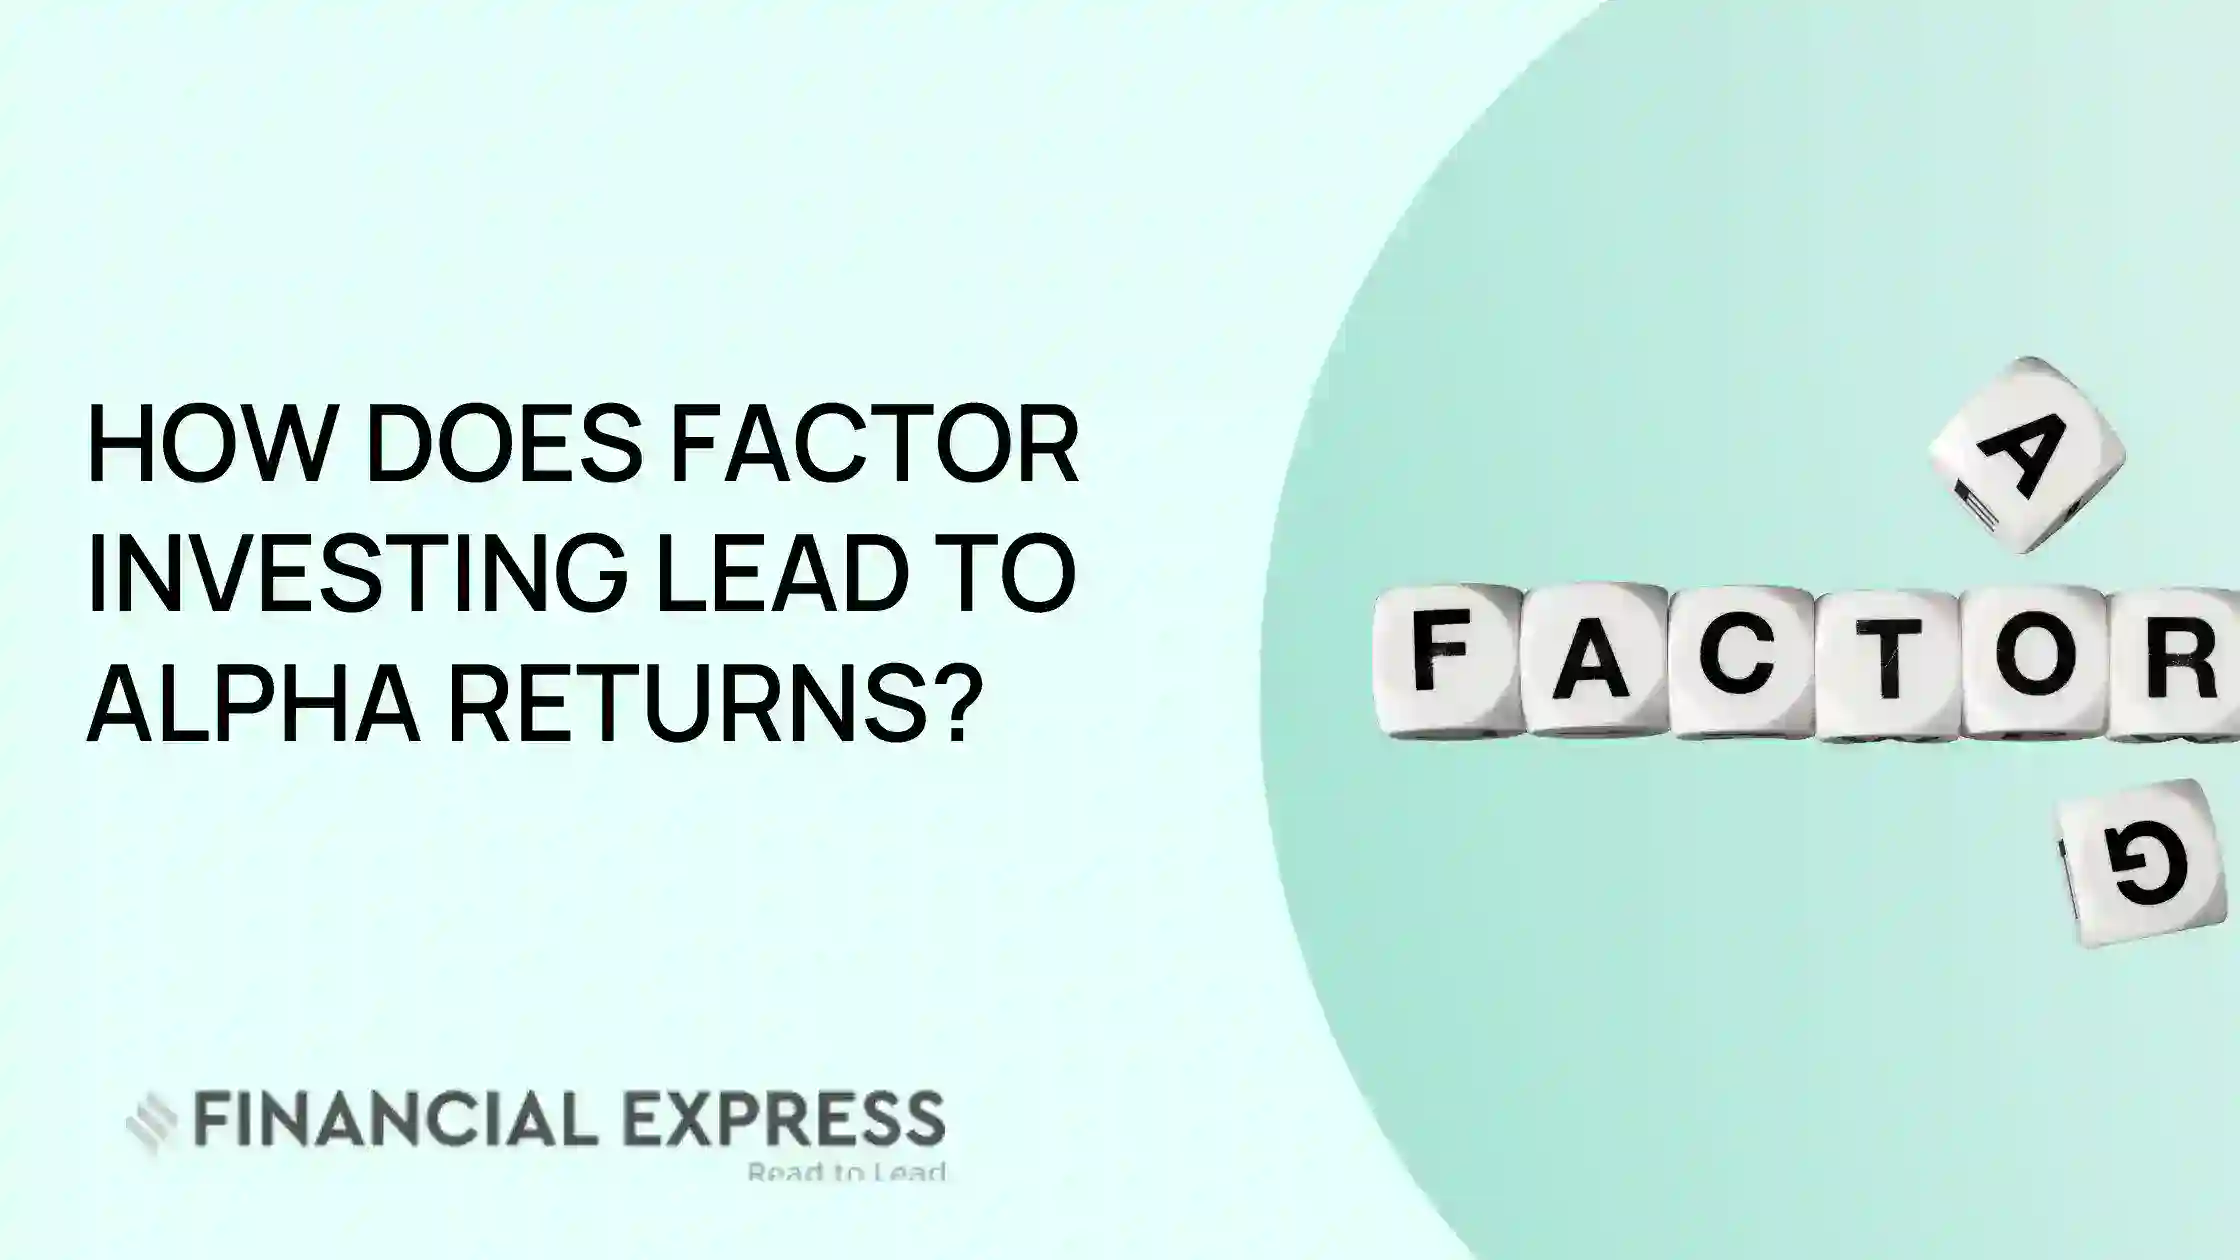 How does factor investing lead to alpha returns?